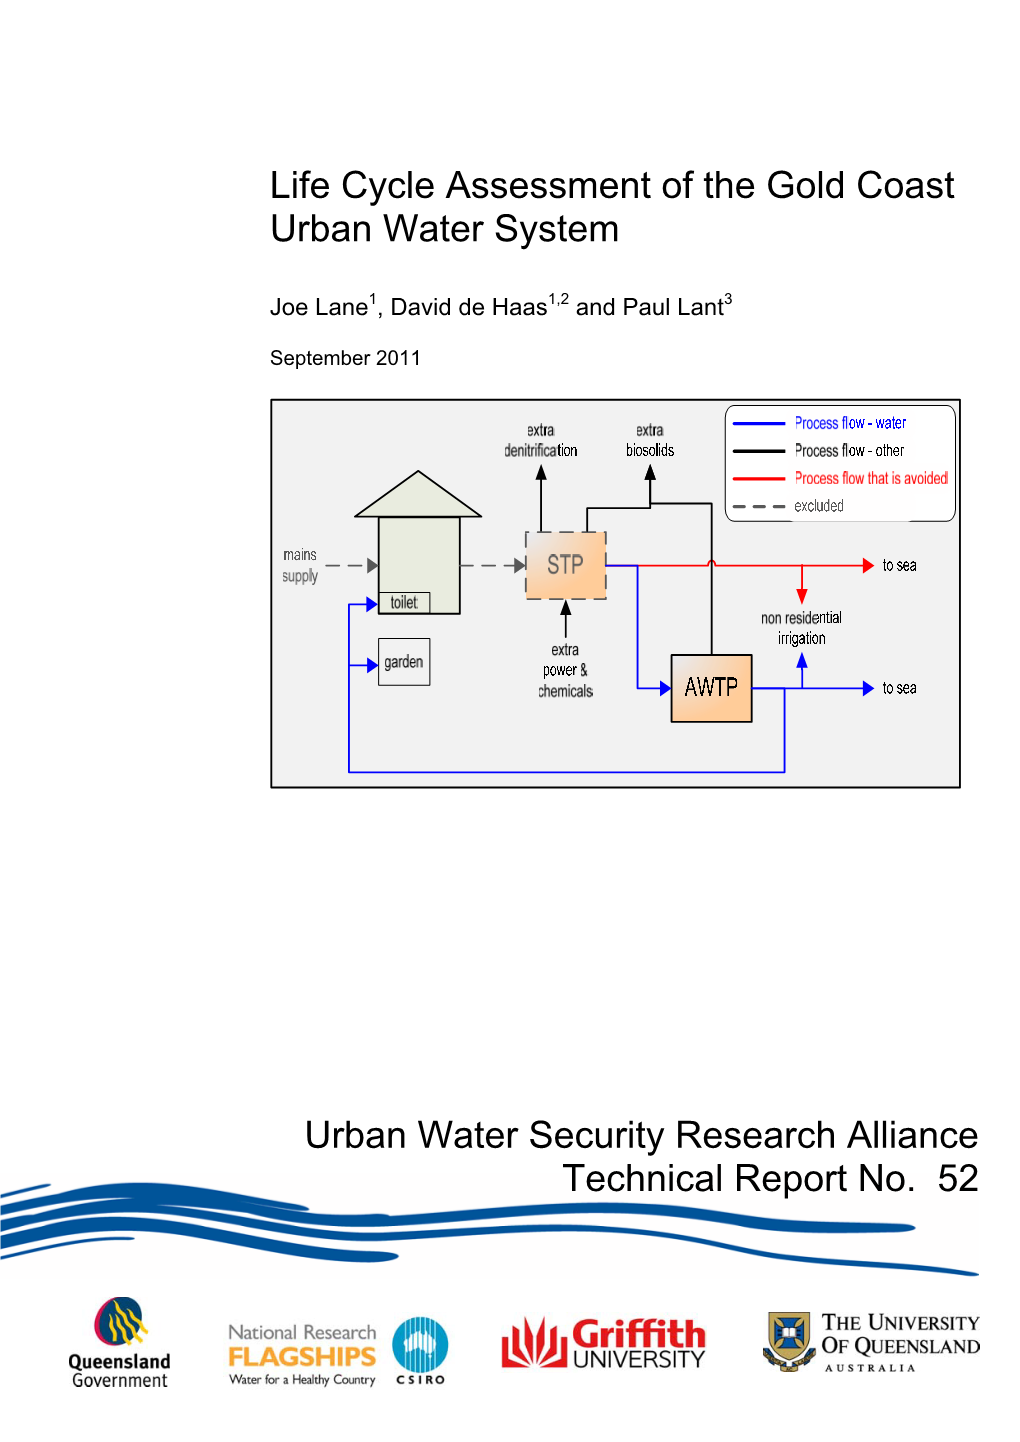 Life Cycle Assessment of the Gold Coast Urban Water System